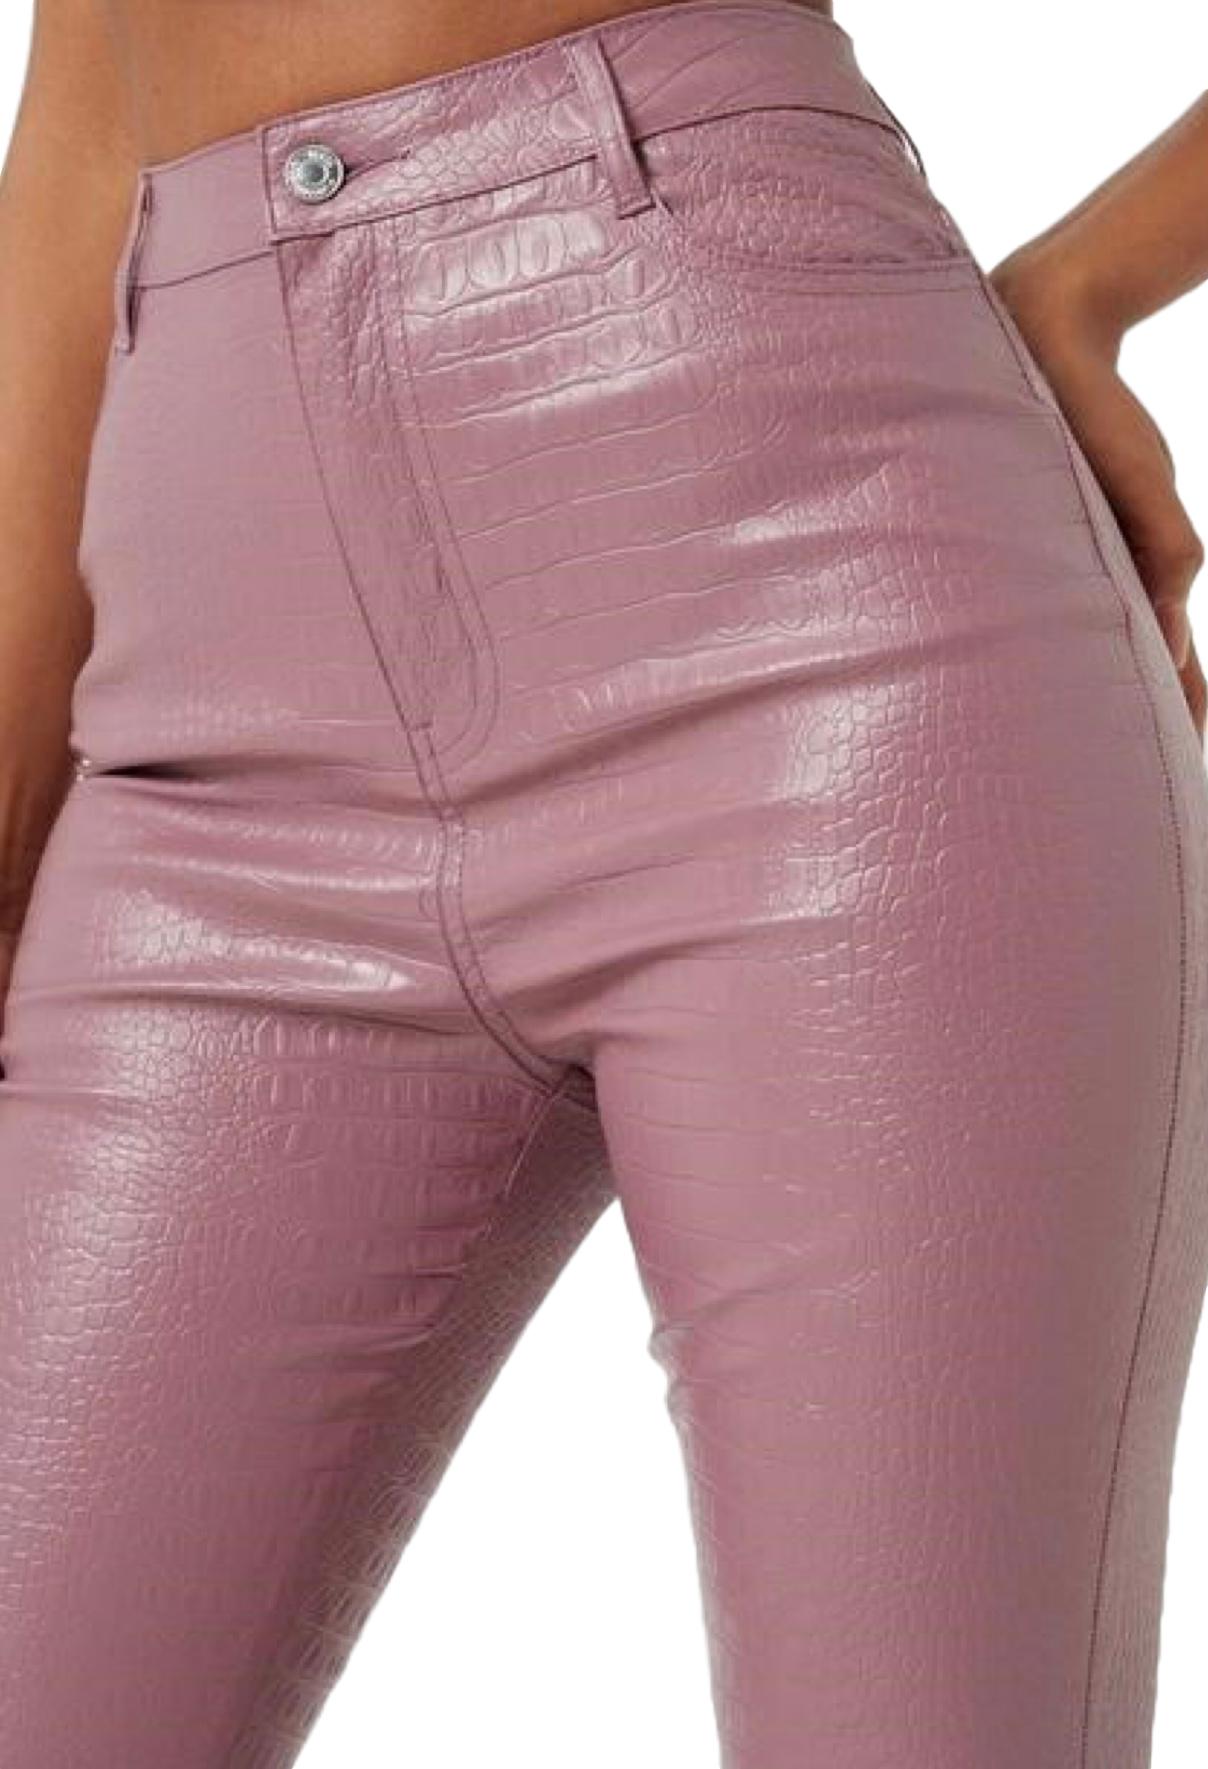 Leather Pants in the color Pink for women - Shop your favorite brands |  FASHIOLA.com.au